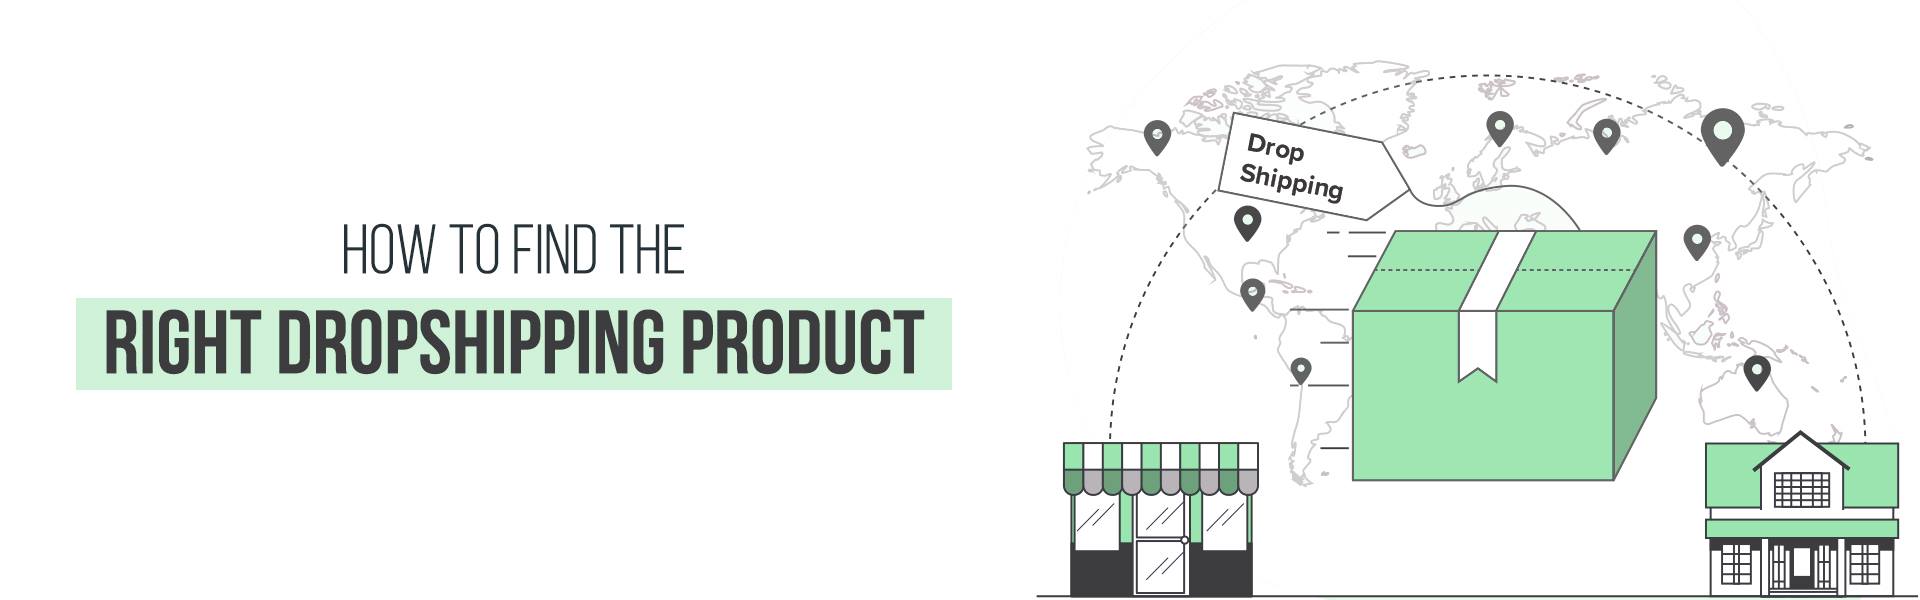 How to Find the Right Dropshipping Product